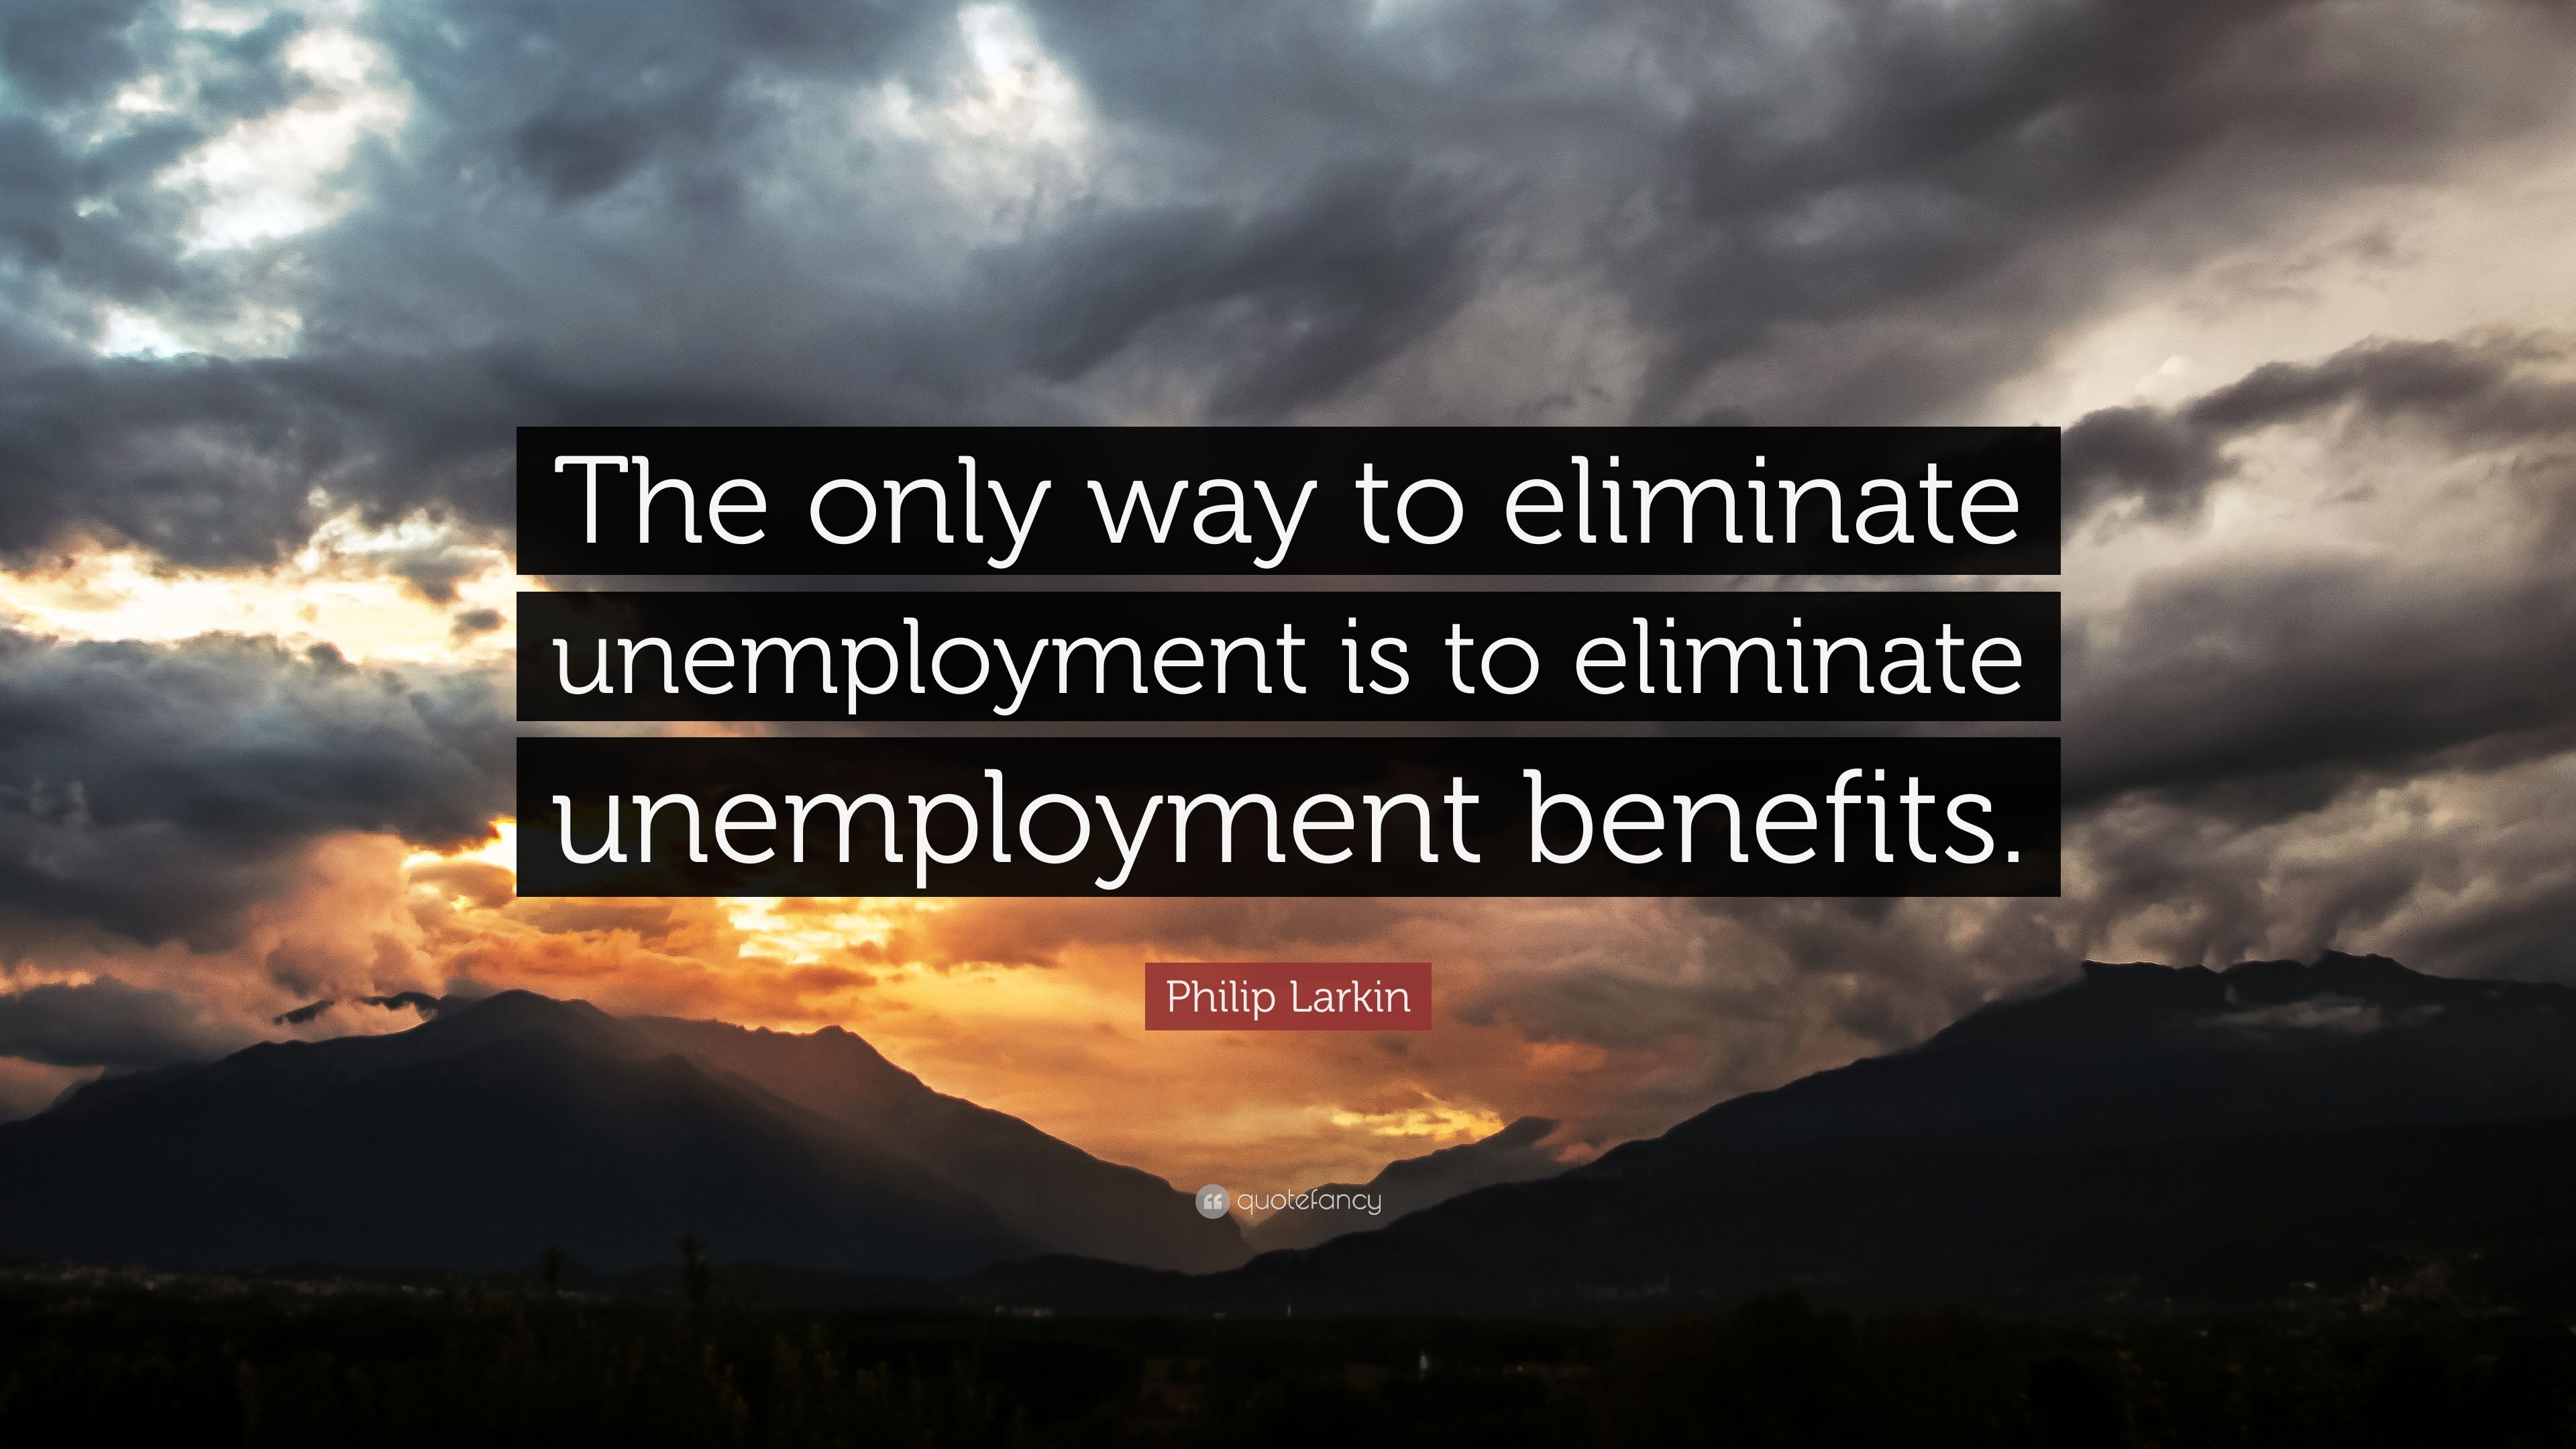 Philip Larkin Quote: “The only way to eliminate unemployment is to eliminate unemployment benefits.” (7 wallpaper)